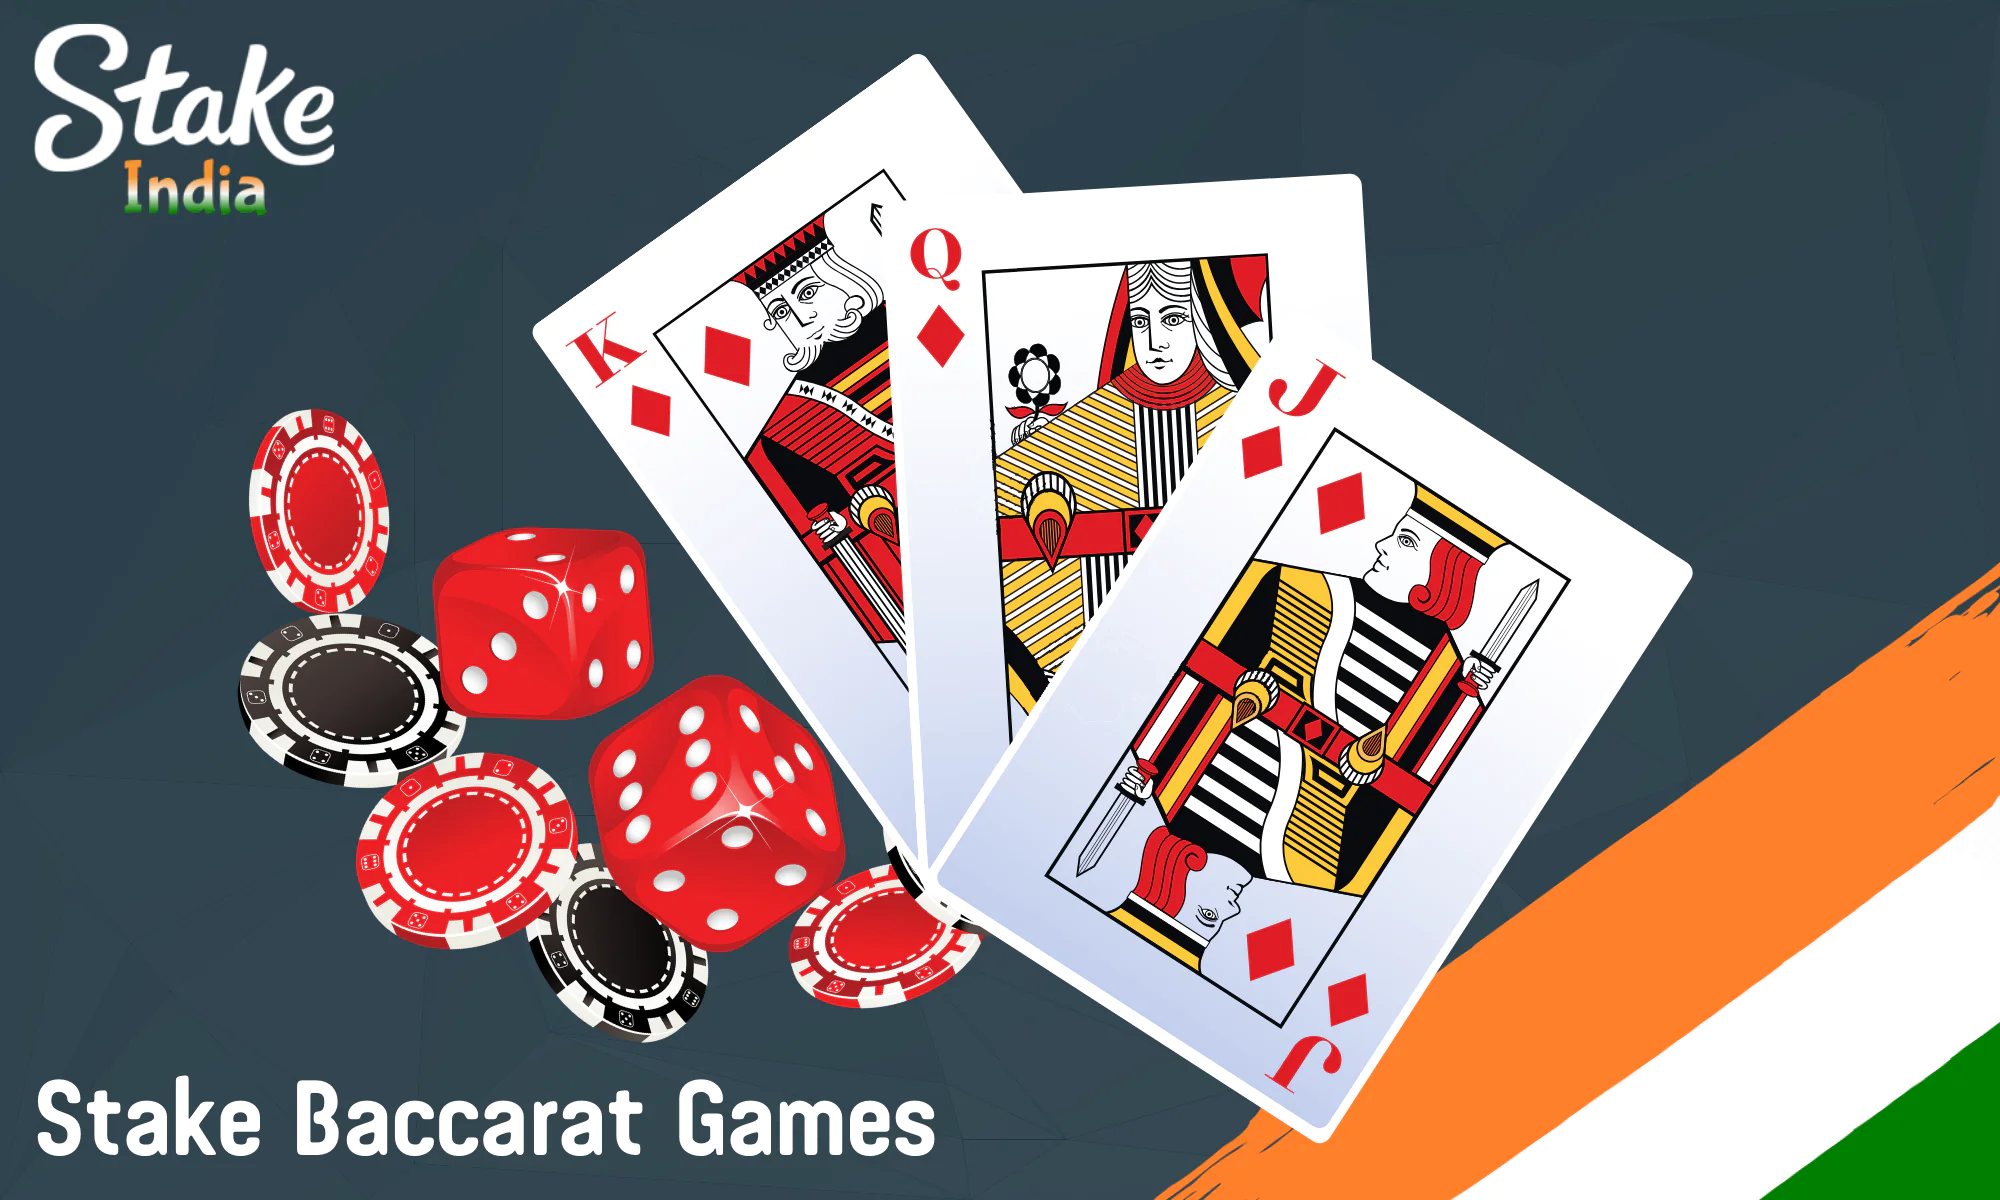 Stake Casino offers various versions of Baccarat for Indian players